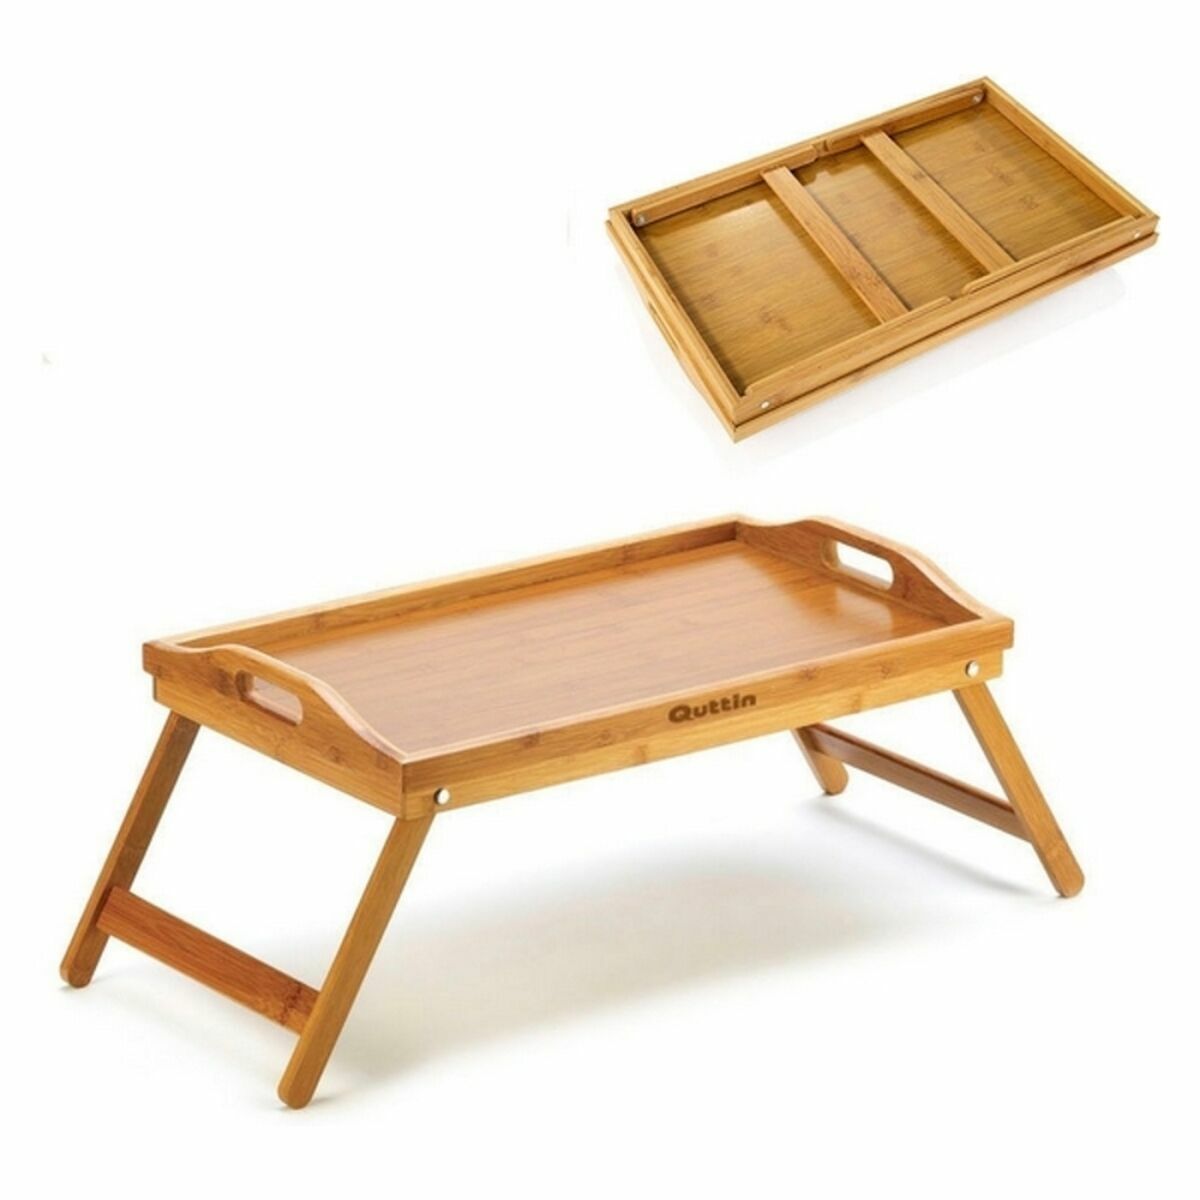 Folding Tray for Bed Quttin Bamboo (50 X 30 cm)